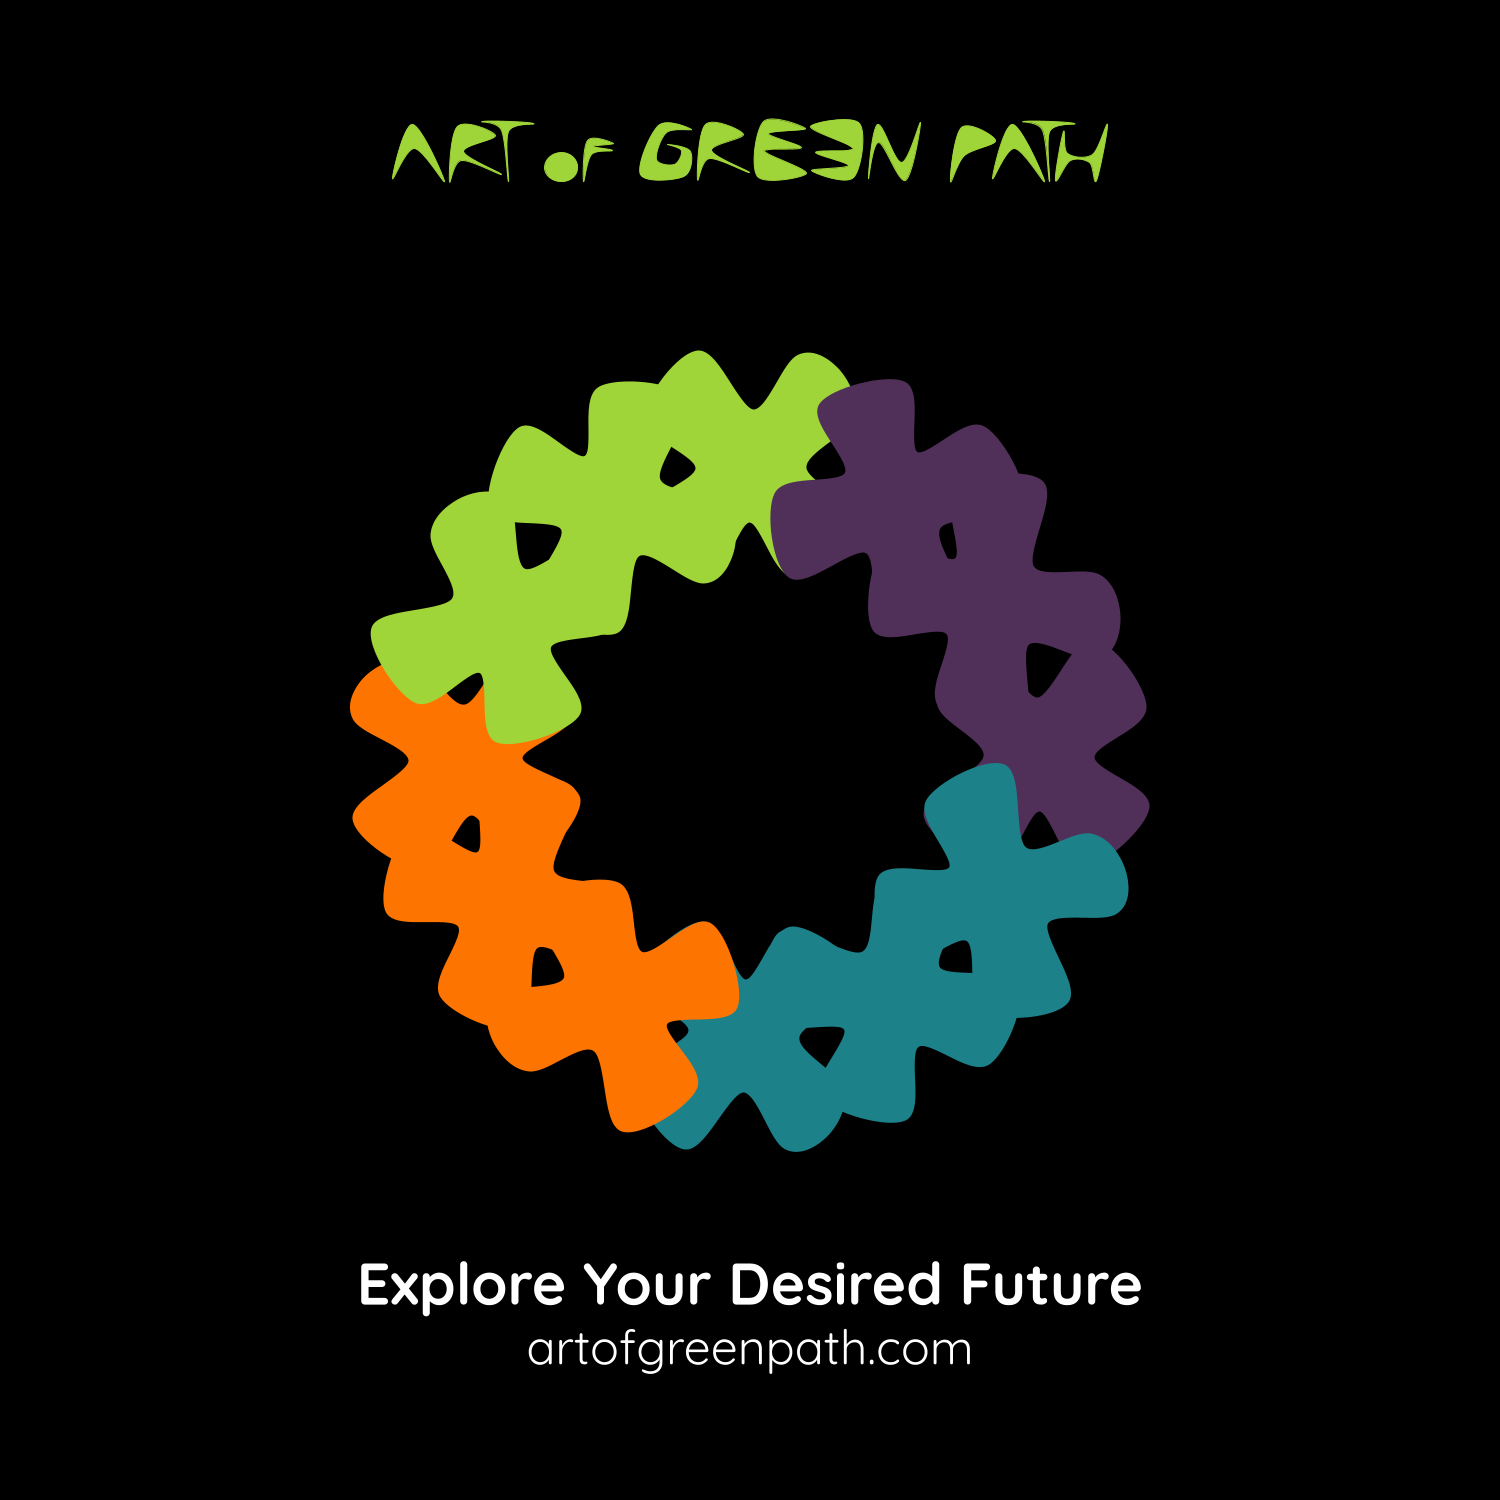 Art Of Green Path - Explore Your Desired Future